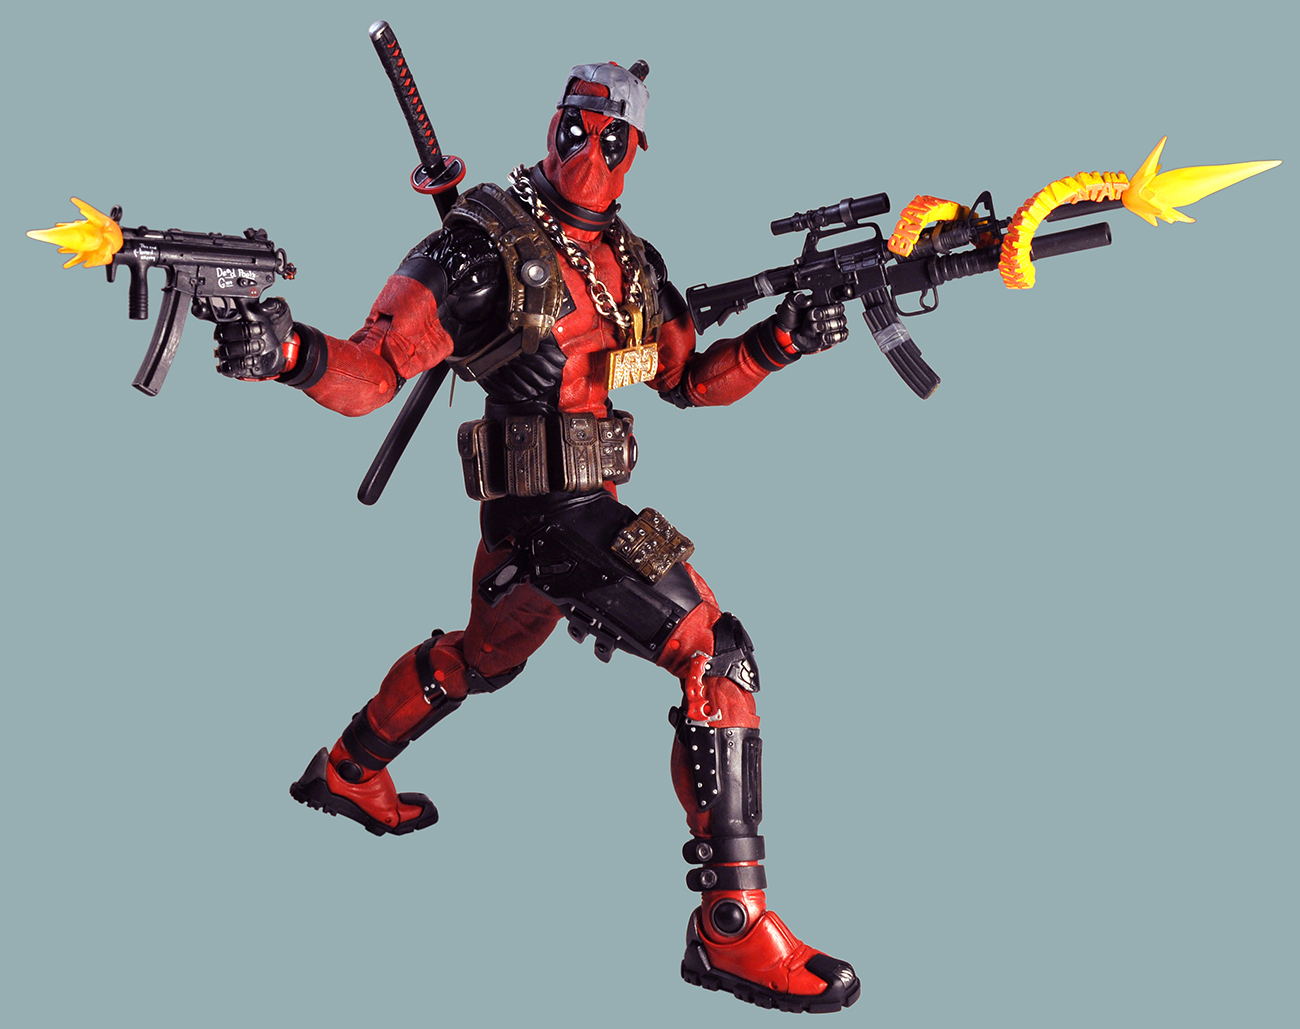 NECA Ultimate Deadpool 18” Figure Photos & Up for Order ...